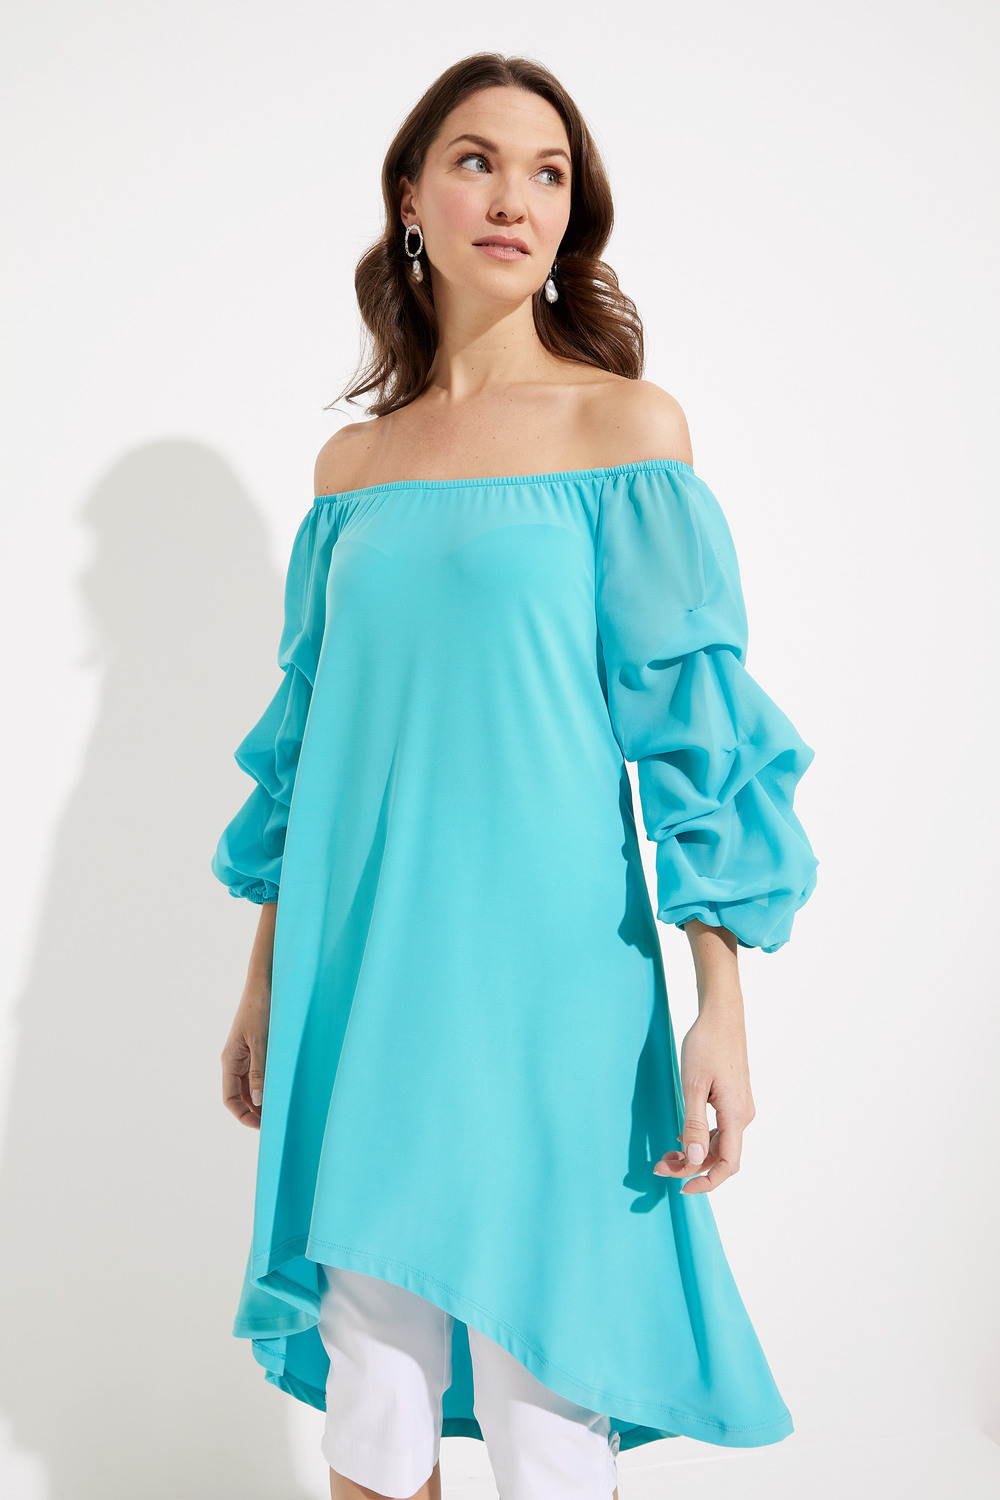 Cold Shoulder Tunic Style 232136. Palm Springs